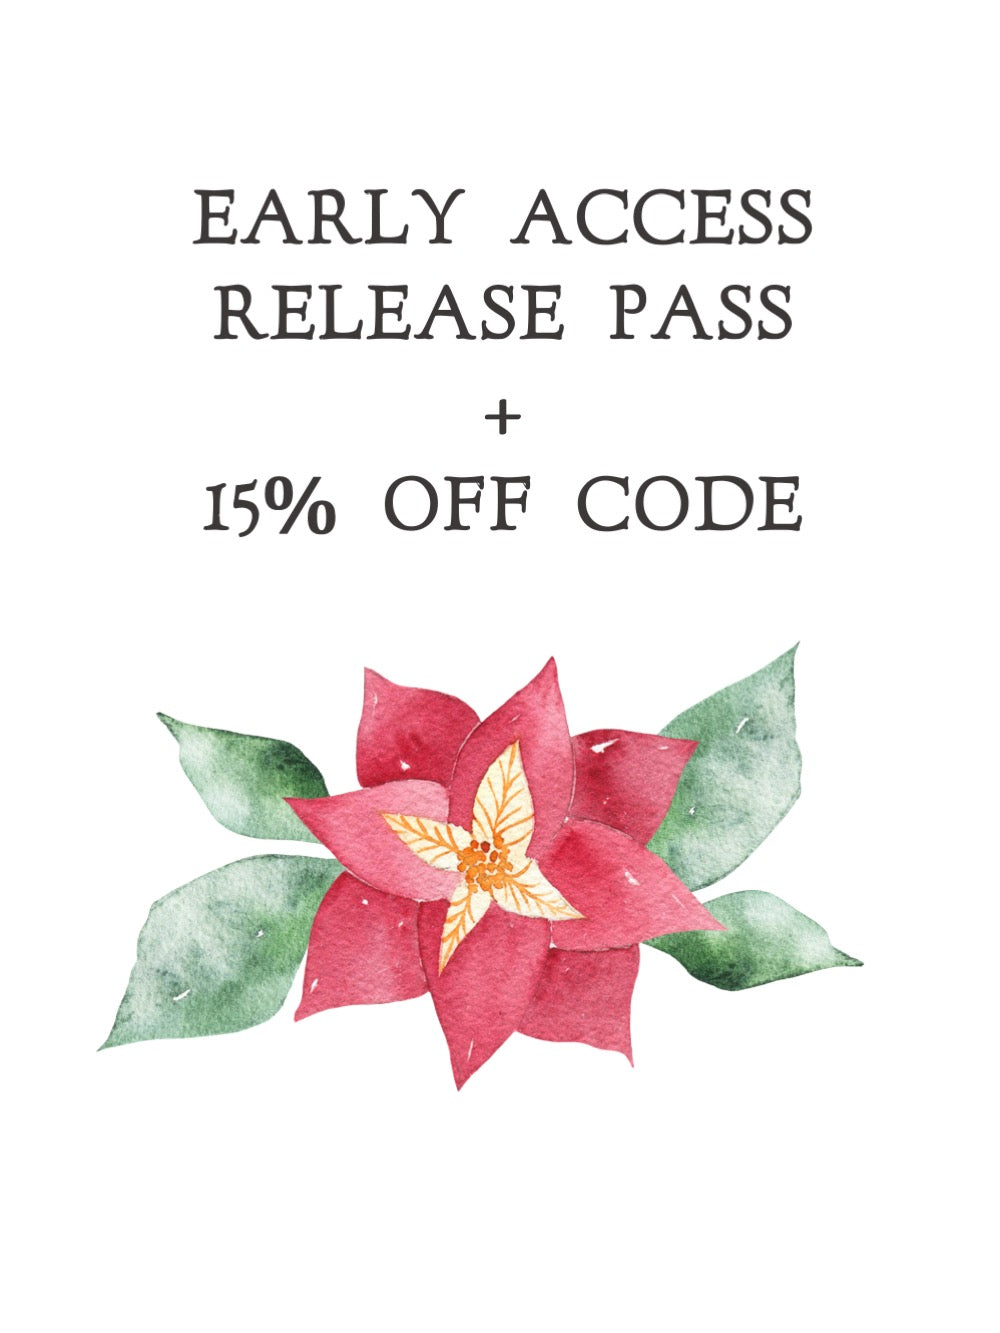 Early Access Pass + Discount Code Bundle